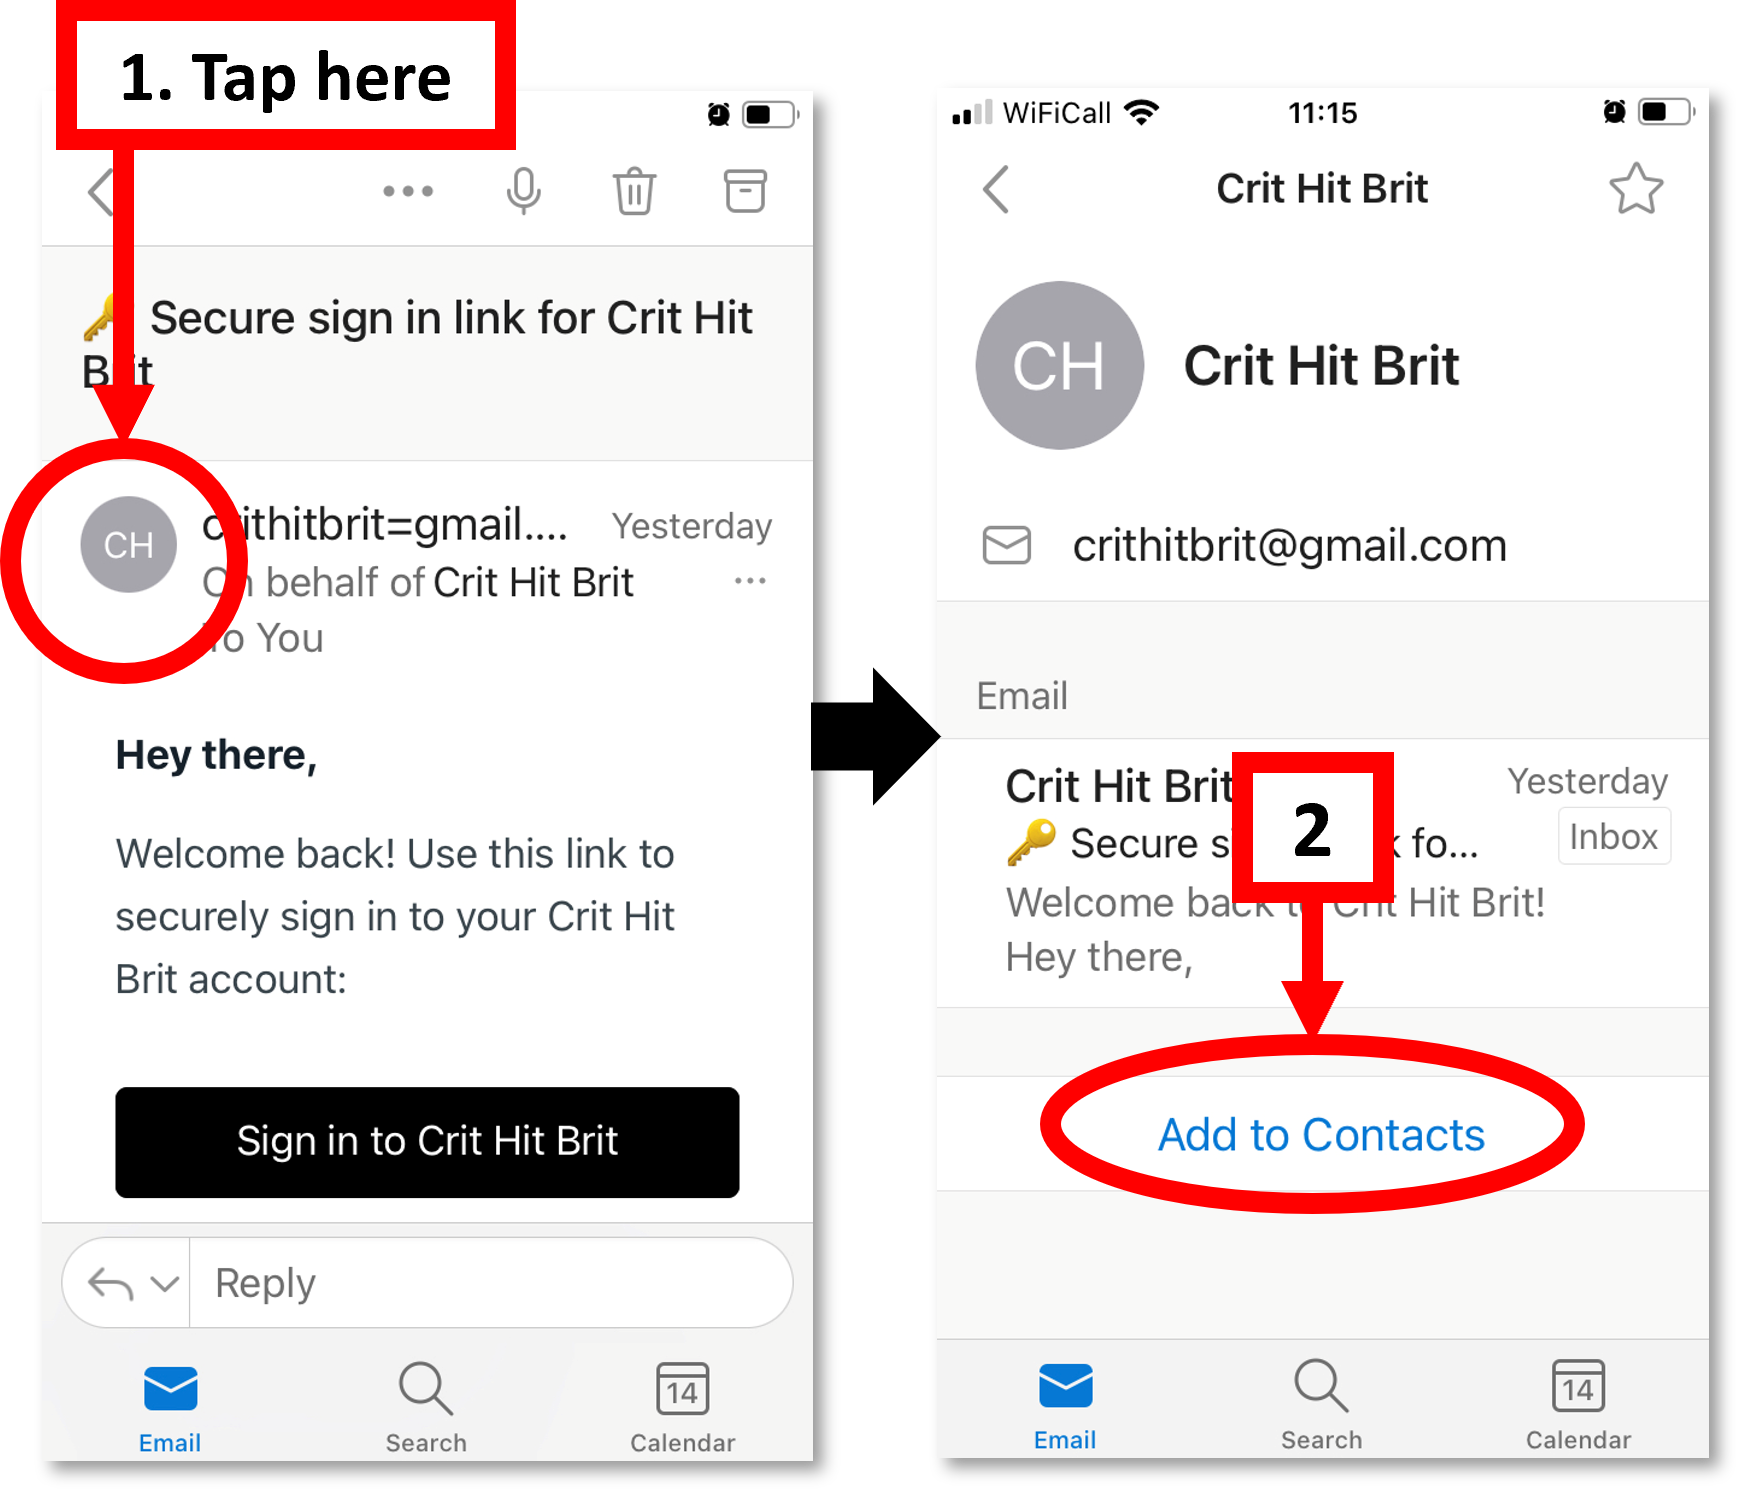 Screenshot of adding contact in the Outlook app